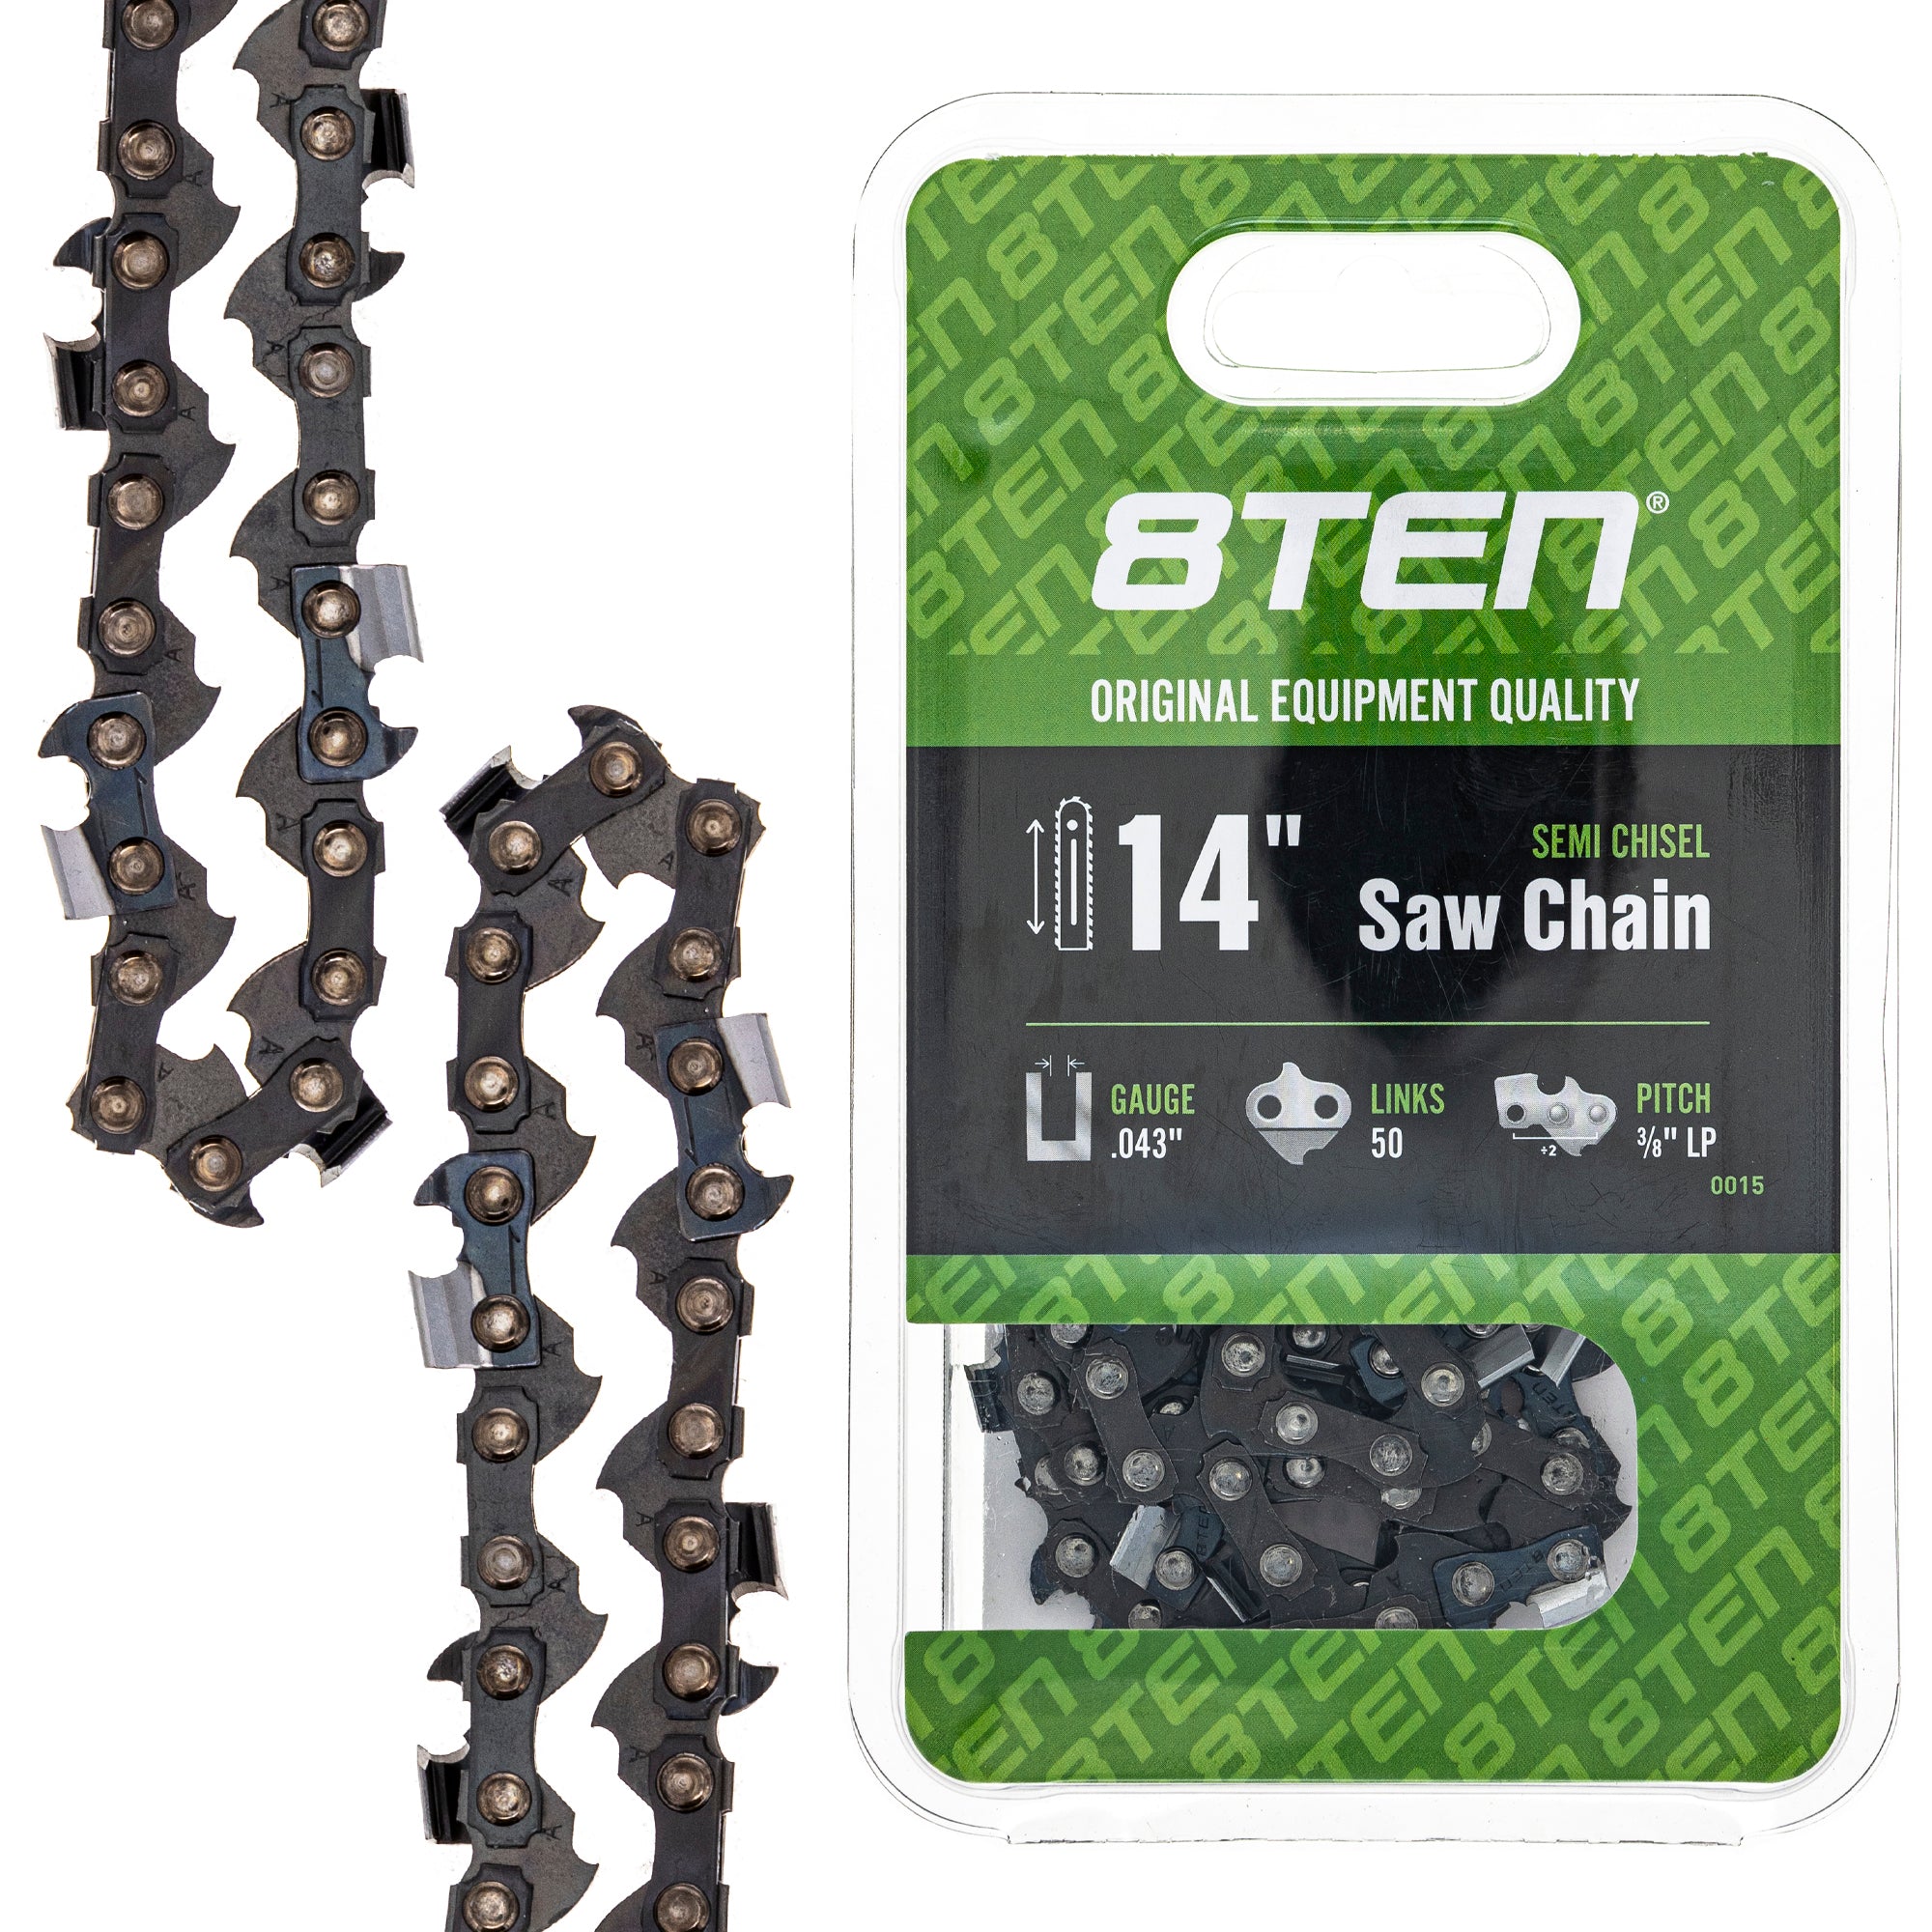 8TEN 810-CCC2237H Chain 5-Pack for zOTHER Stens Oregon Carlton MSE